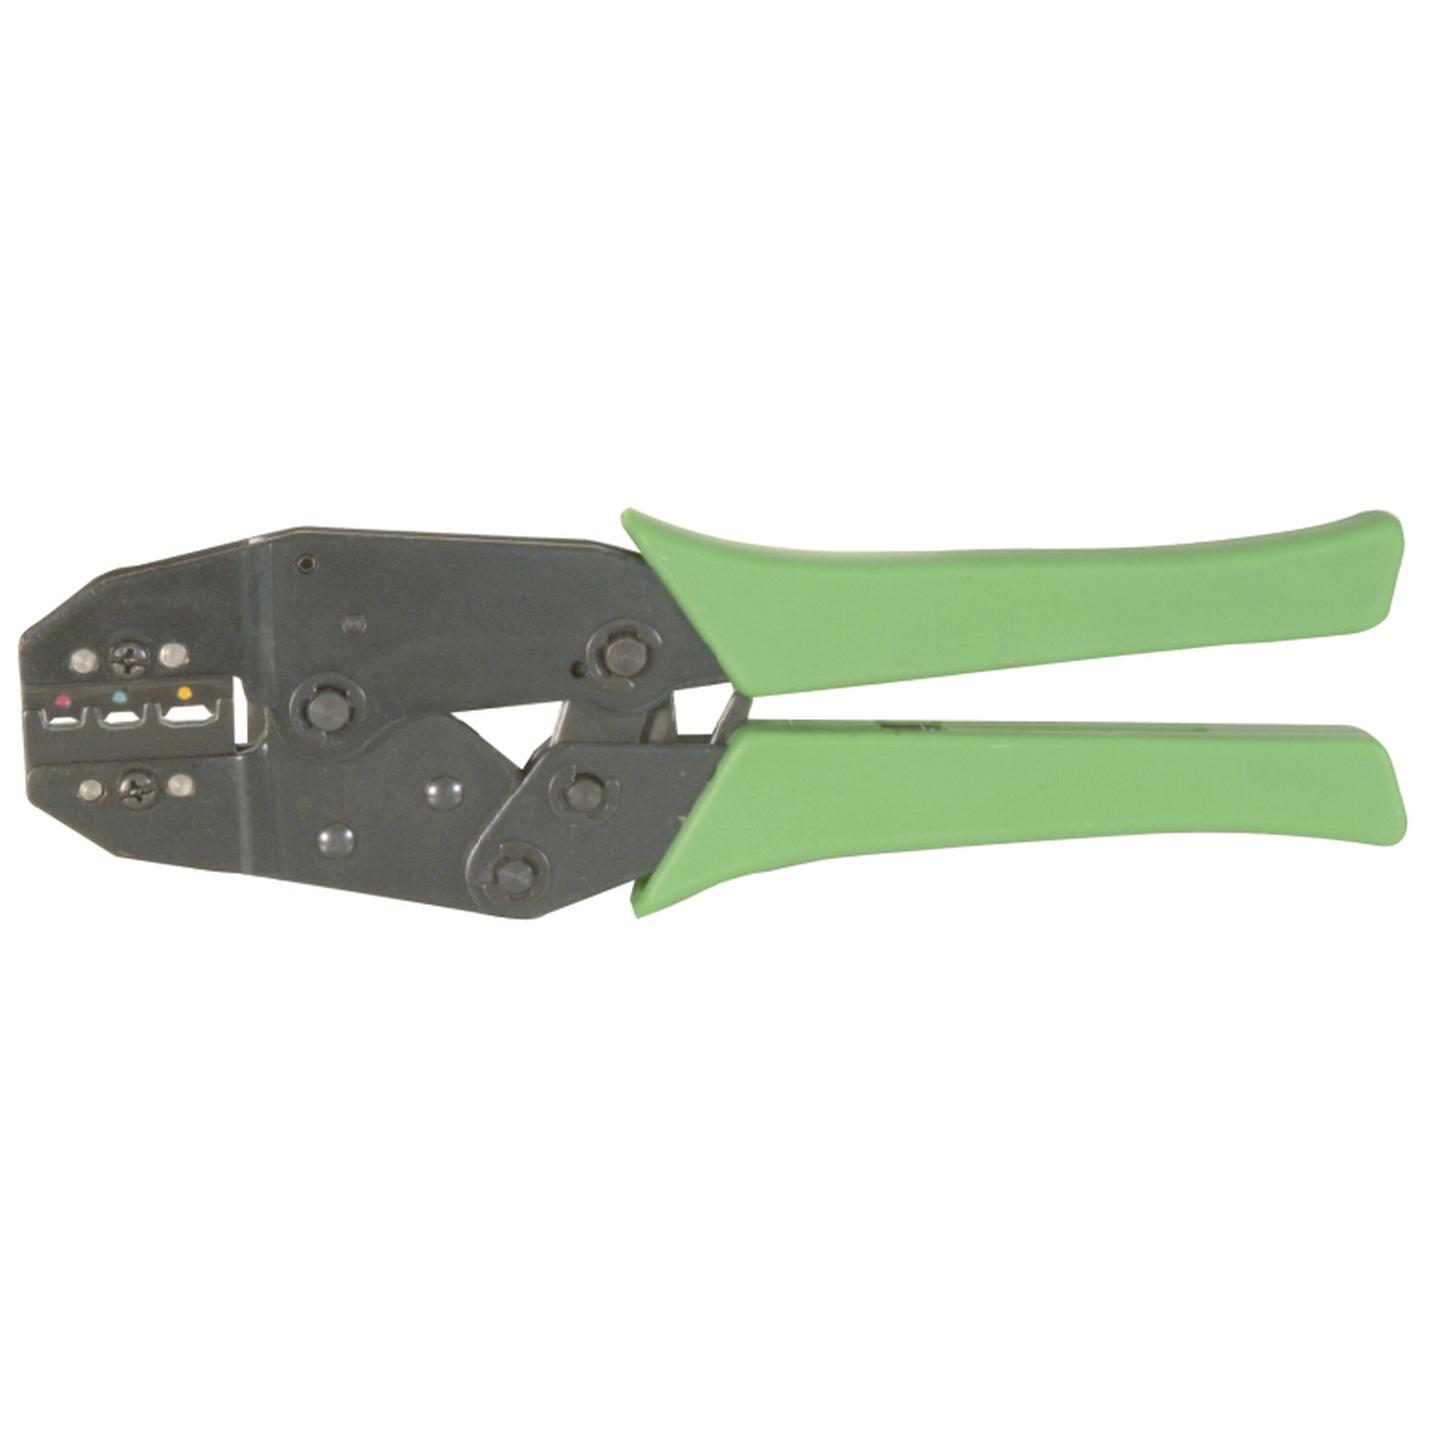 Heavy Duty Ratchet Crimping Tool For Insulated Terminals